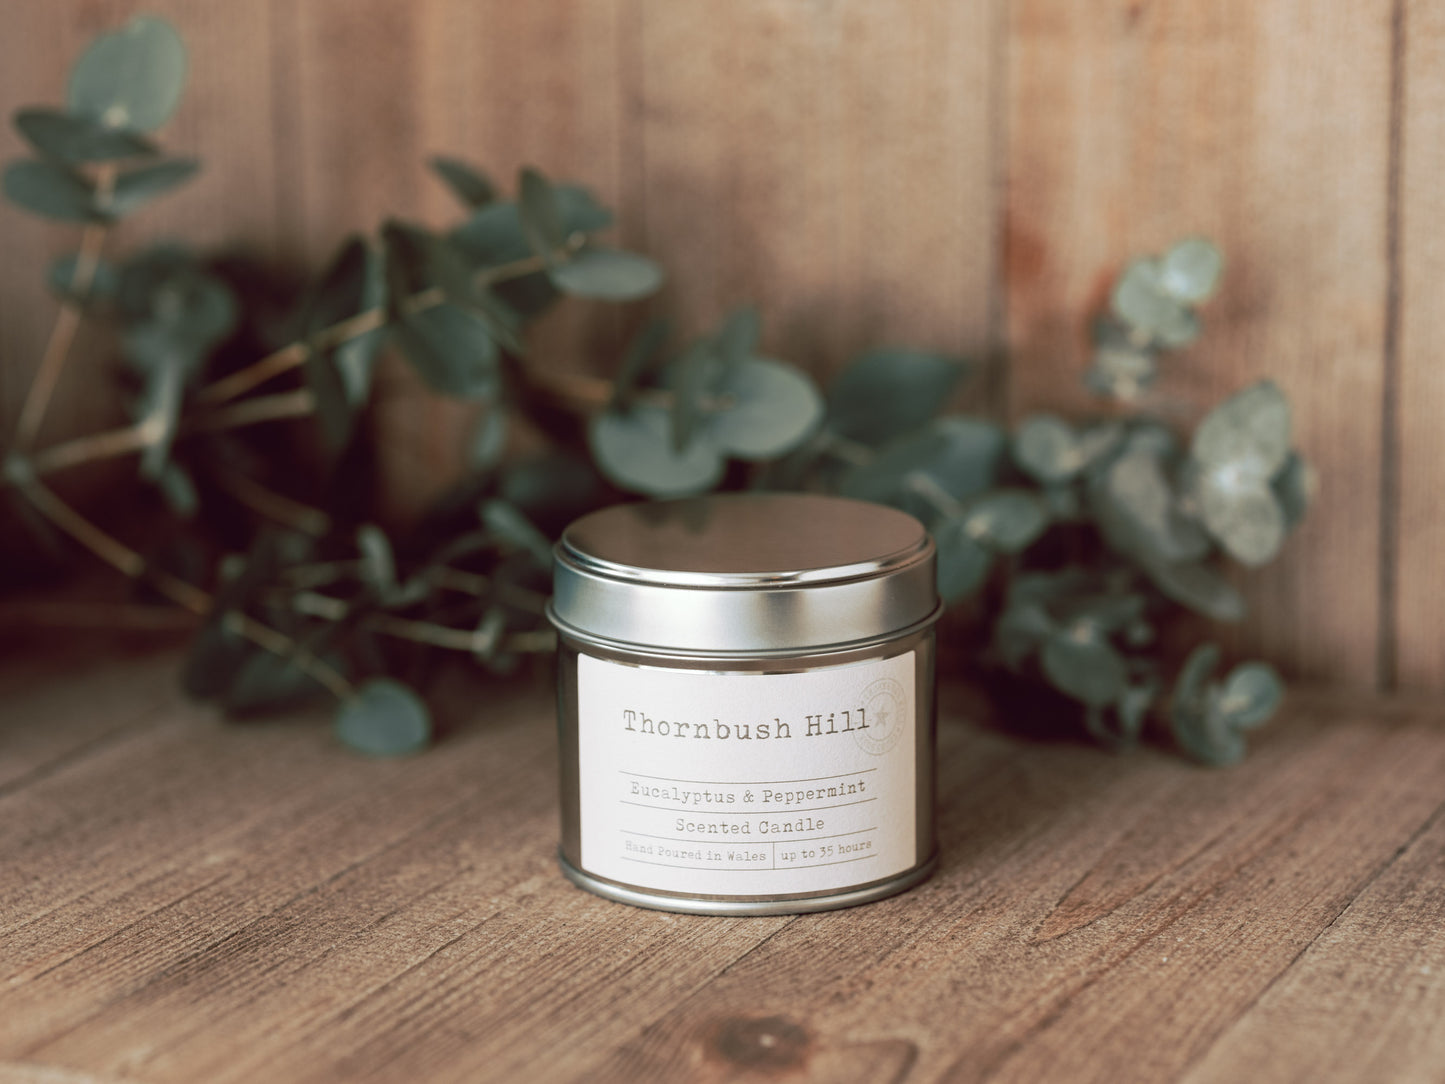 Eucalyptus & Peppermint Scented Soy Tin Candle